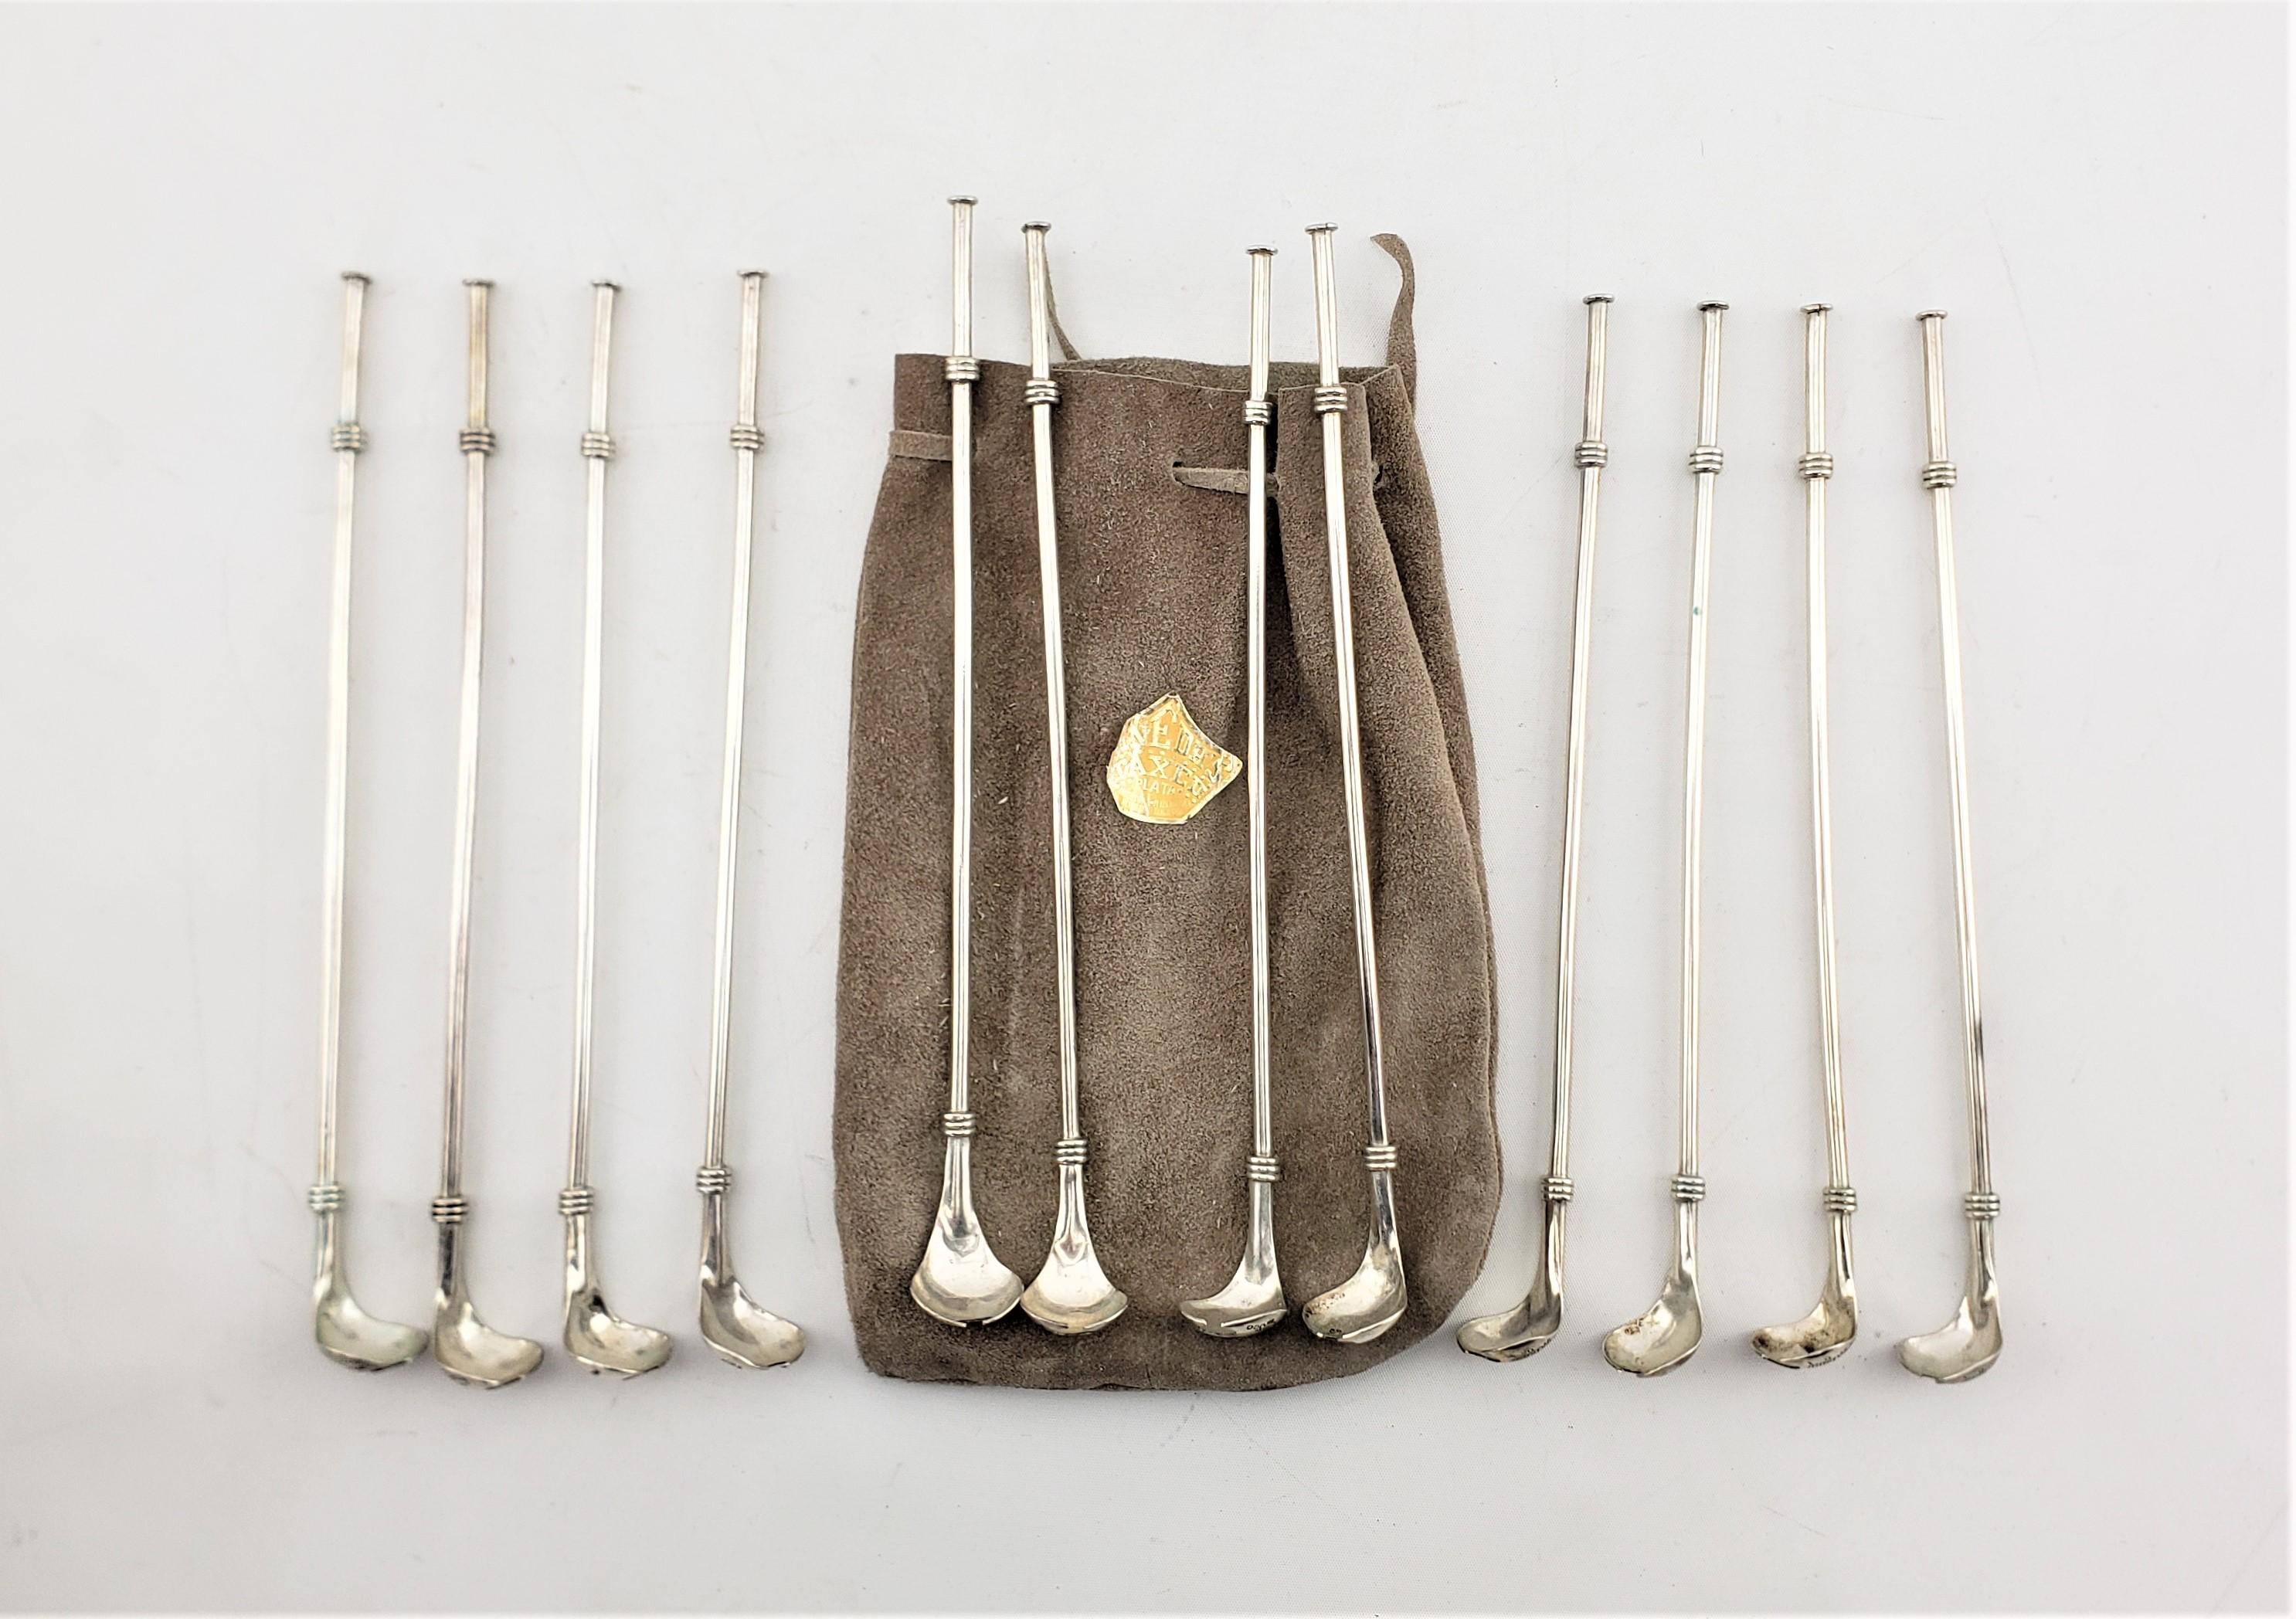 This set of twelve sterling silver cocktail spoons were made by the renowned Taxco of Mexico in approximately 1960 in the period Mid-Century Modern style. The spoons stand approximately eight and a half inches high with a hollow tubed handle that